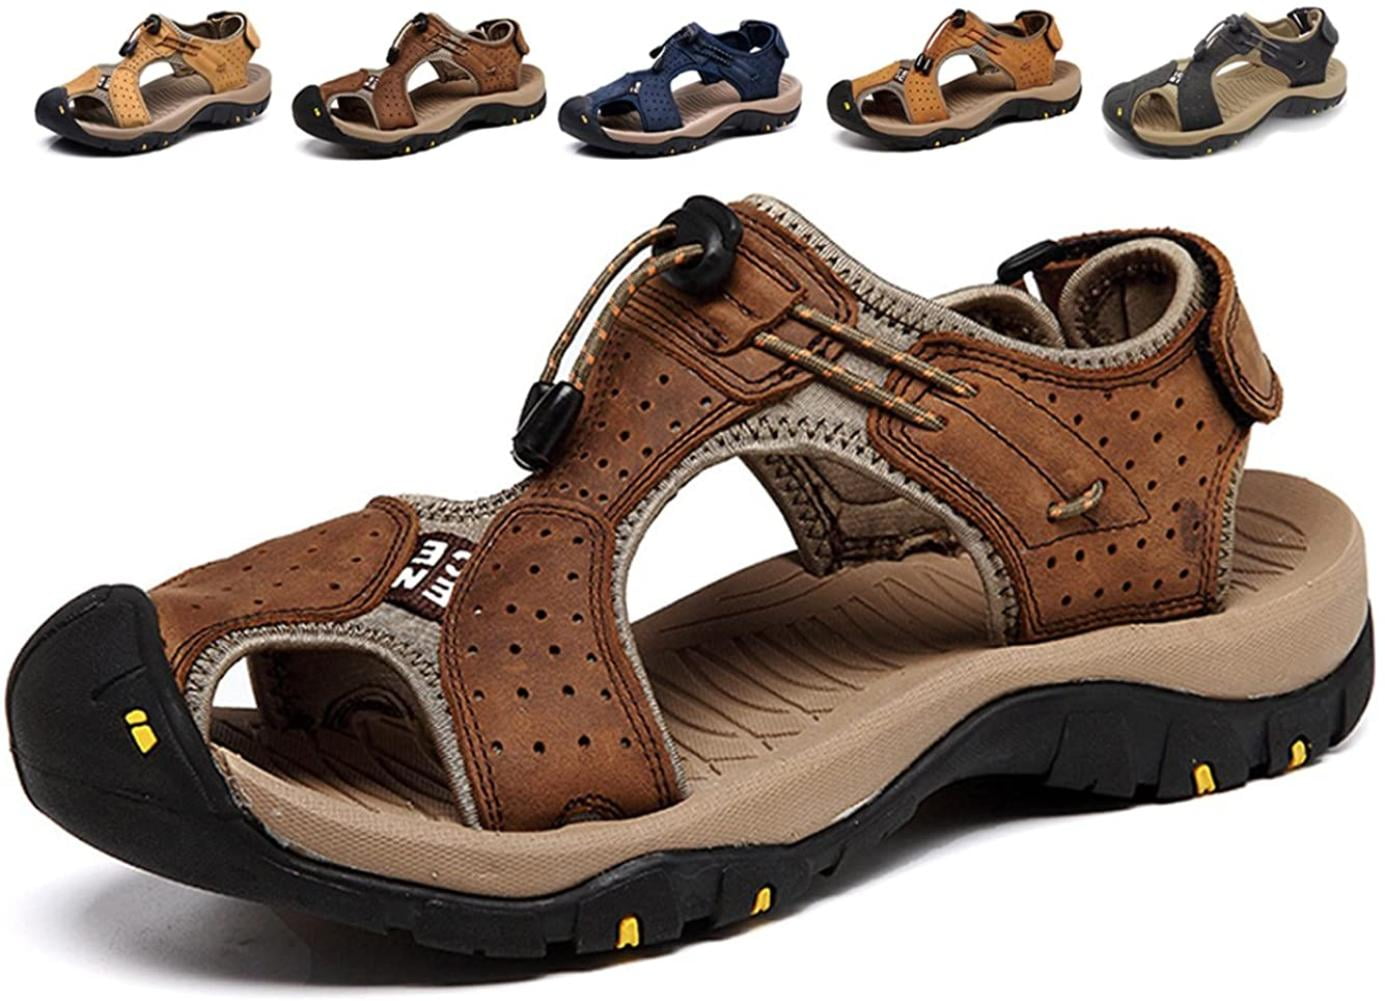 Men Casual Summer Sports Sandals Close Toe Outdoor Leather Beach Fisherman Shoes 